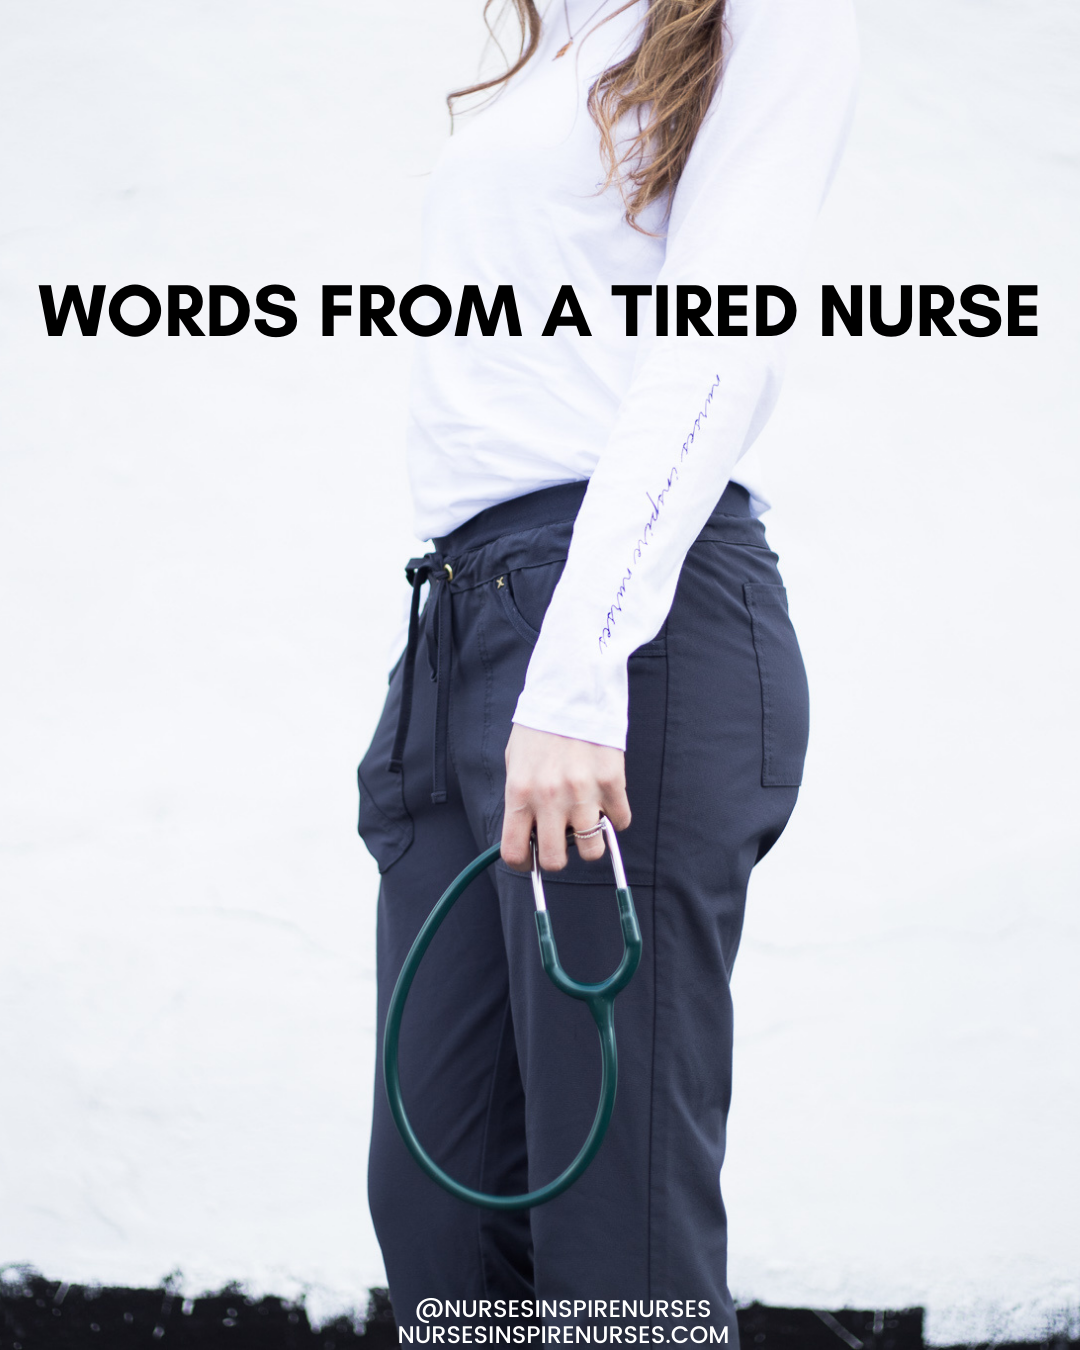 Words from a Tired Nurse